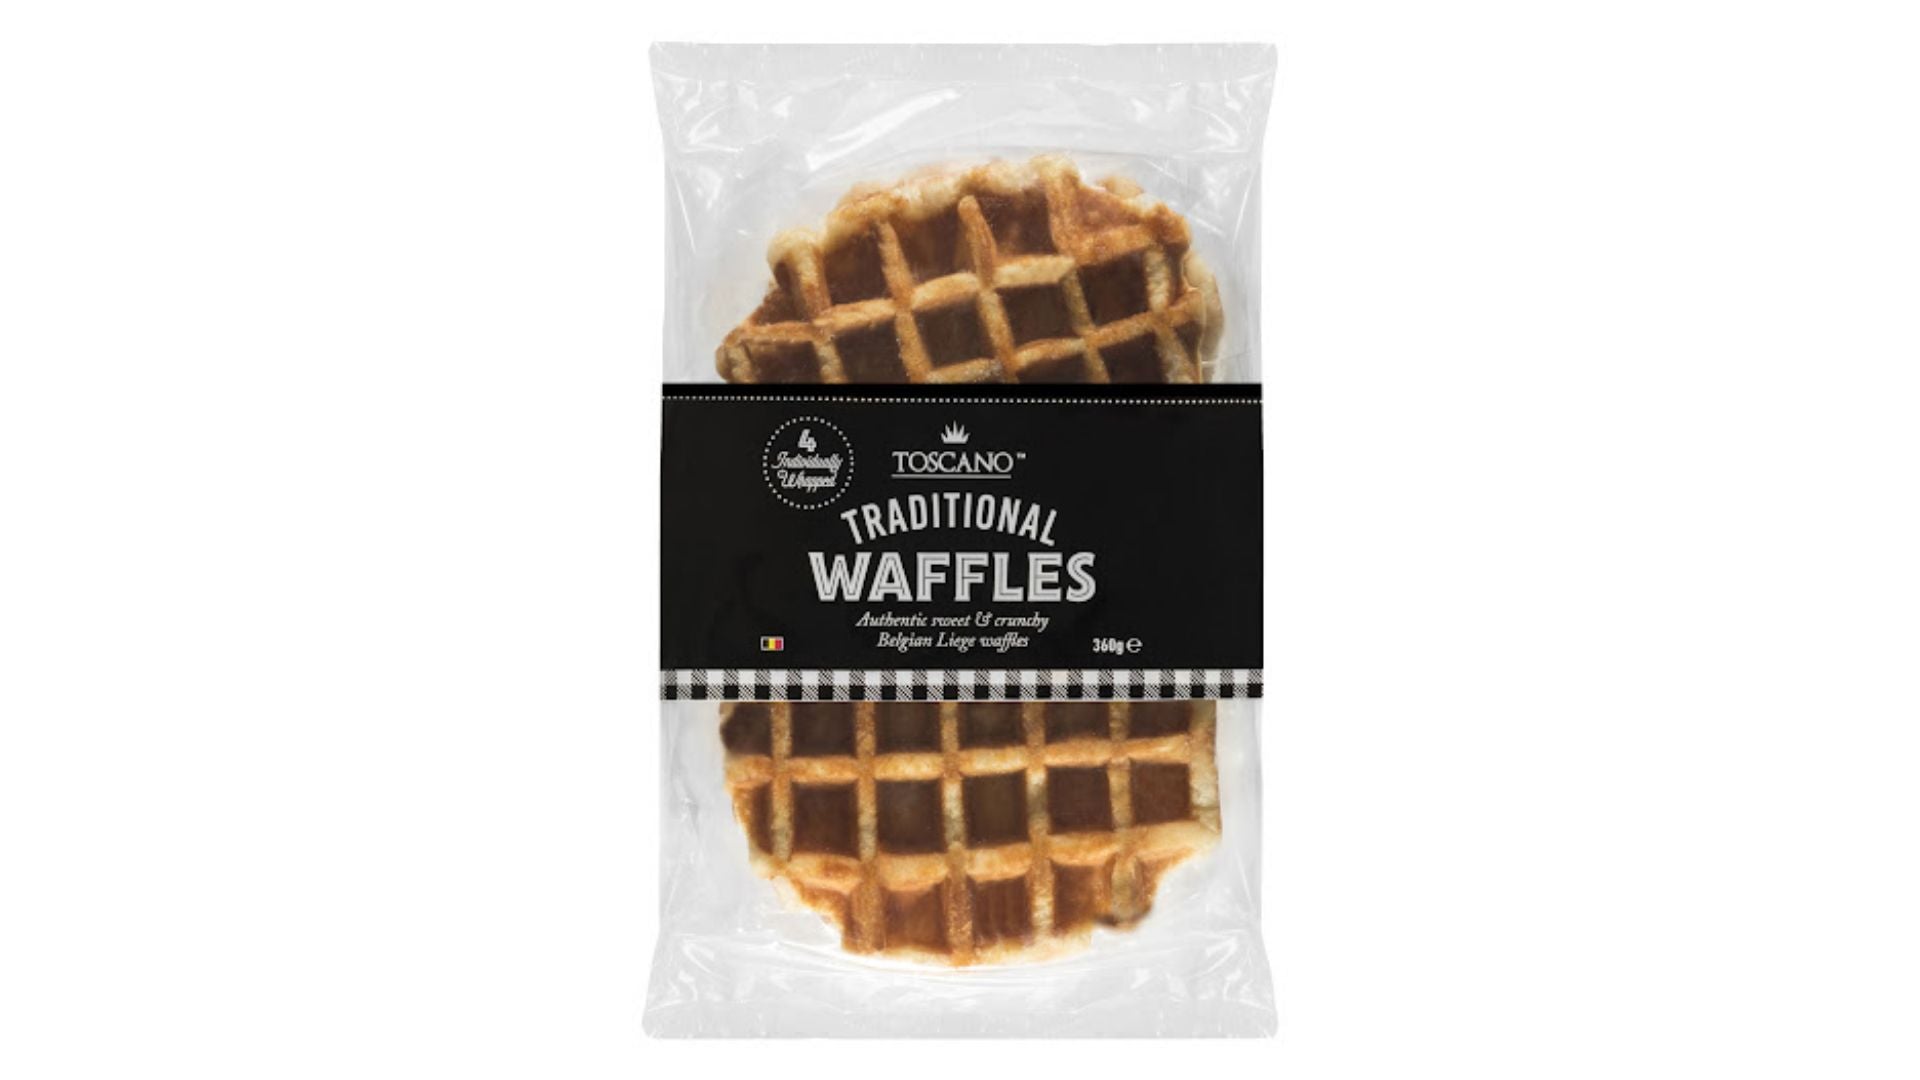 Toscano Waffles Traditional 4 Pack 360g